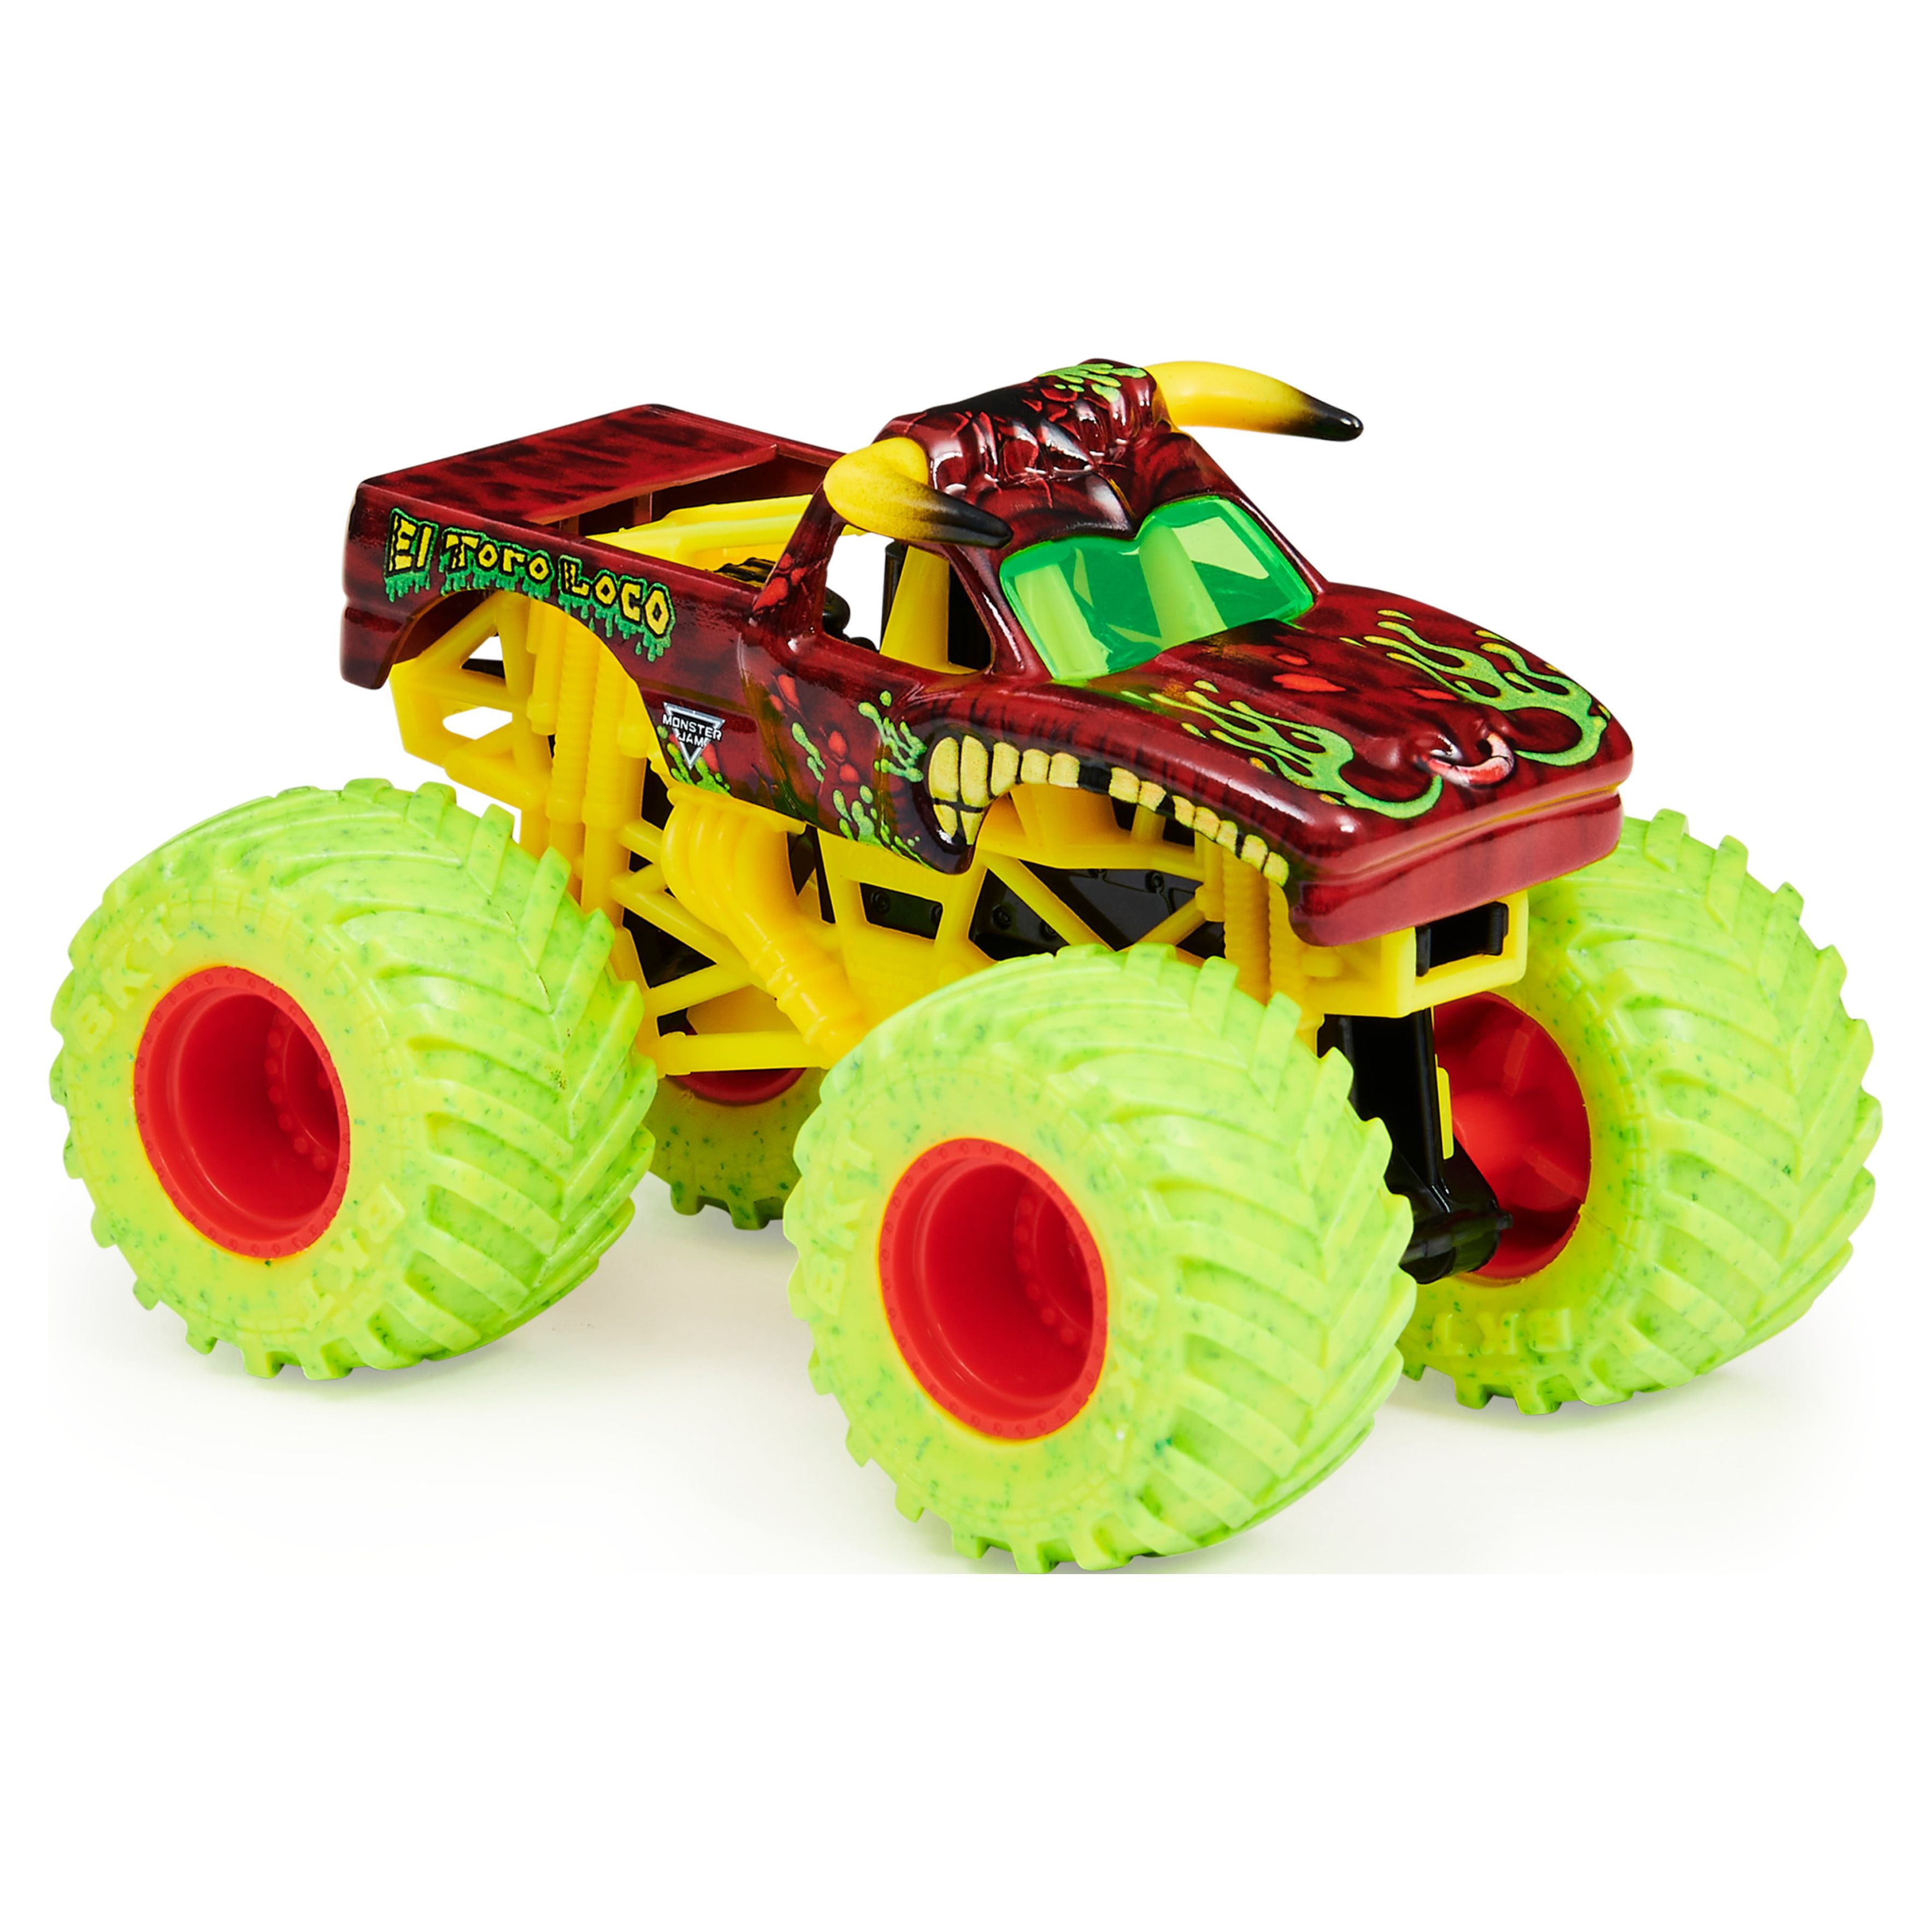 Monster Jam Gears and Galaxies Die-Cast Monster Truck, 1:64 Scale (Styles May Vary) - image 5 of 7